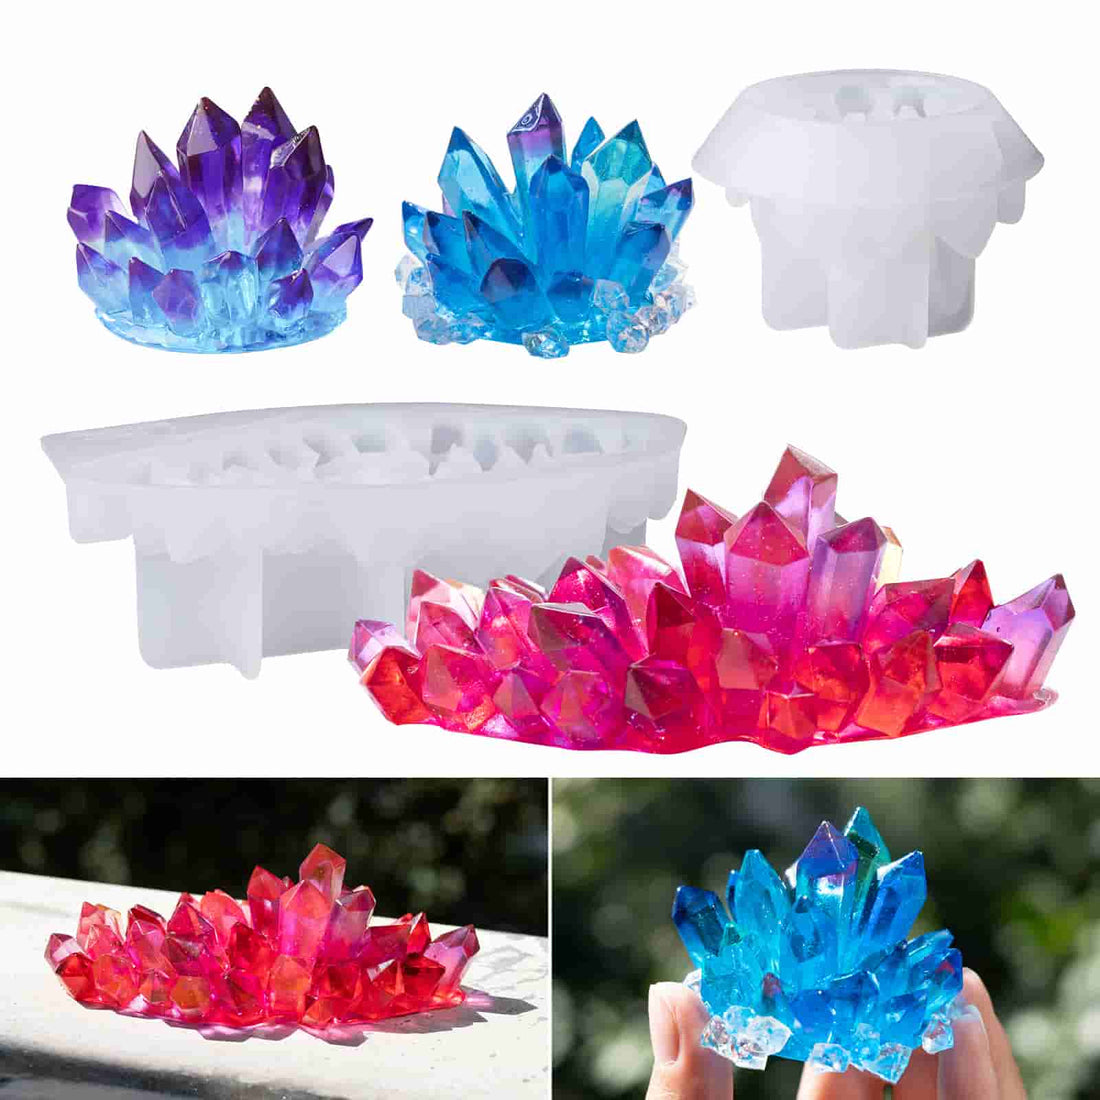 Crystal Cluster Resin Molds